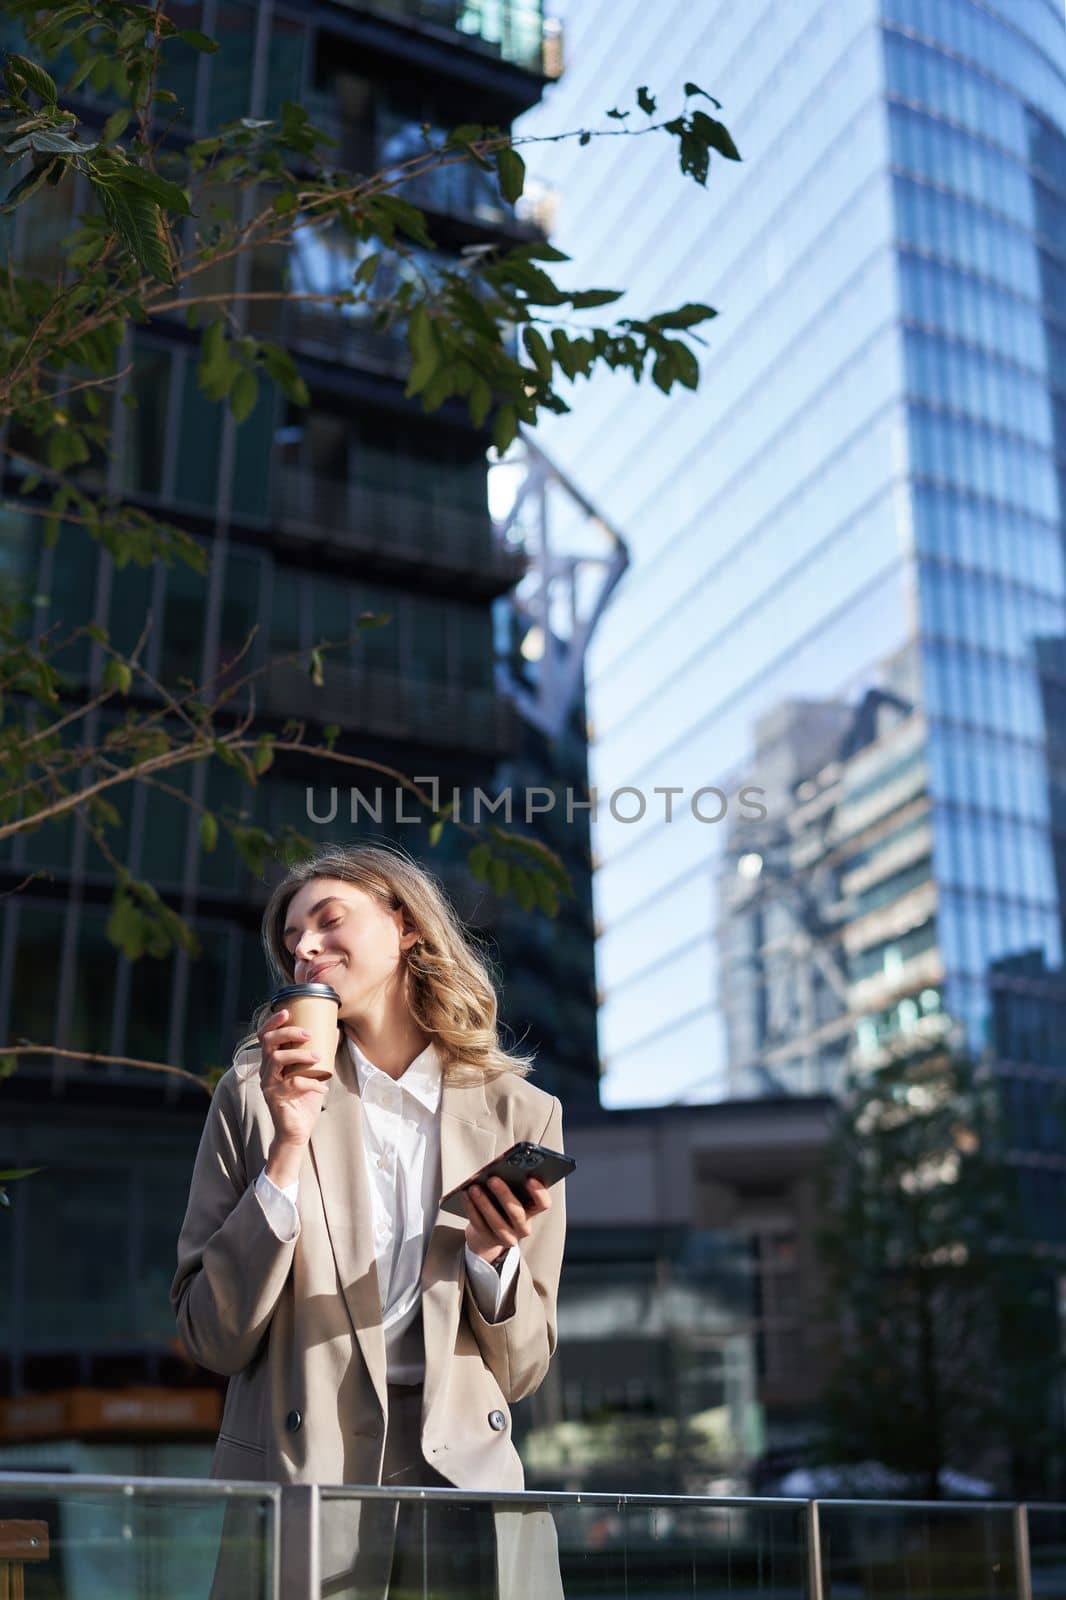 Enthusiastic businesswoman drinks her coffee takeaway on street, holds mobile phone, standing in beige suit, office outfit.